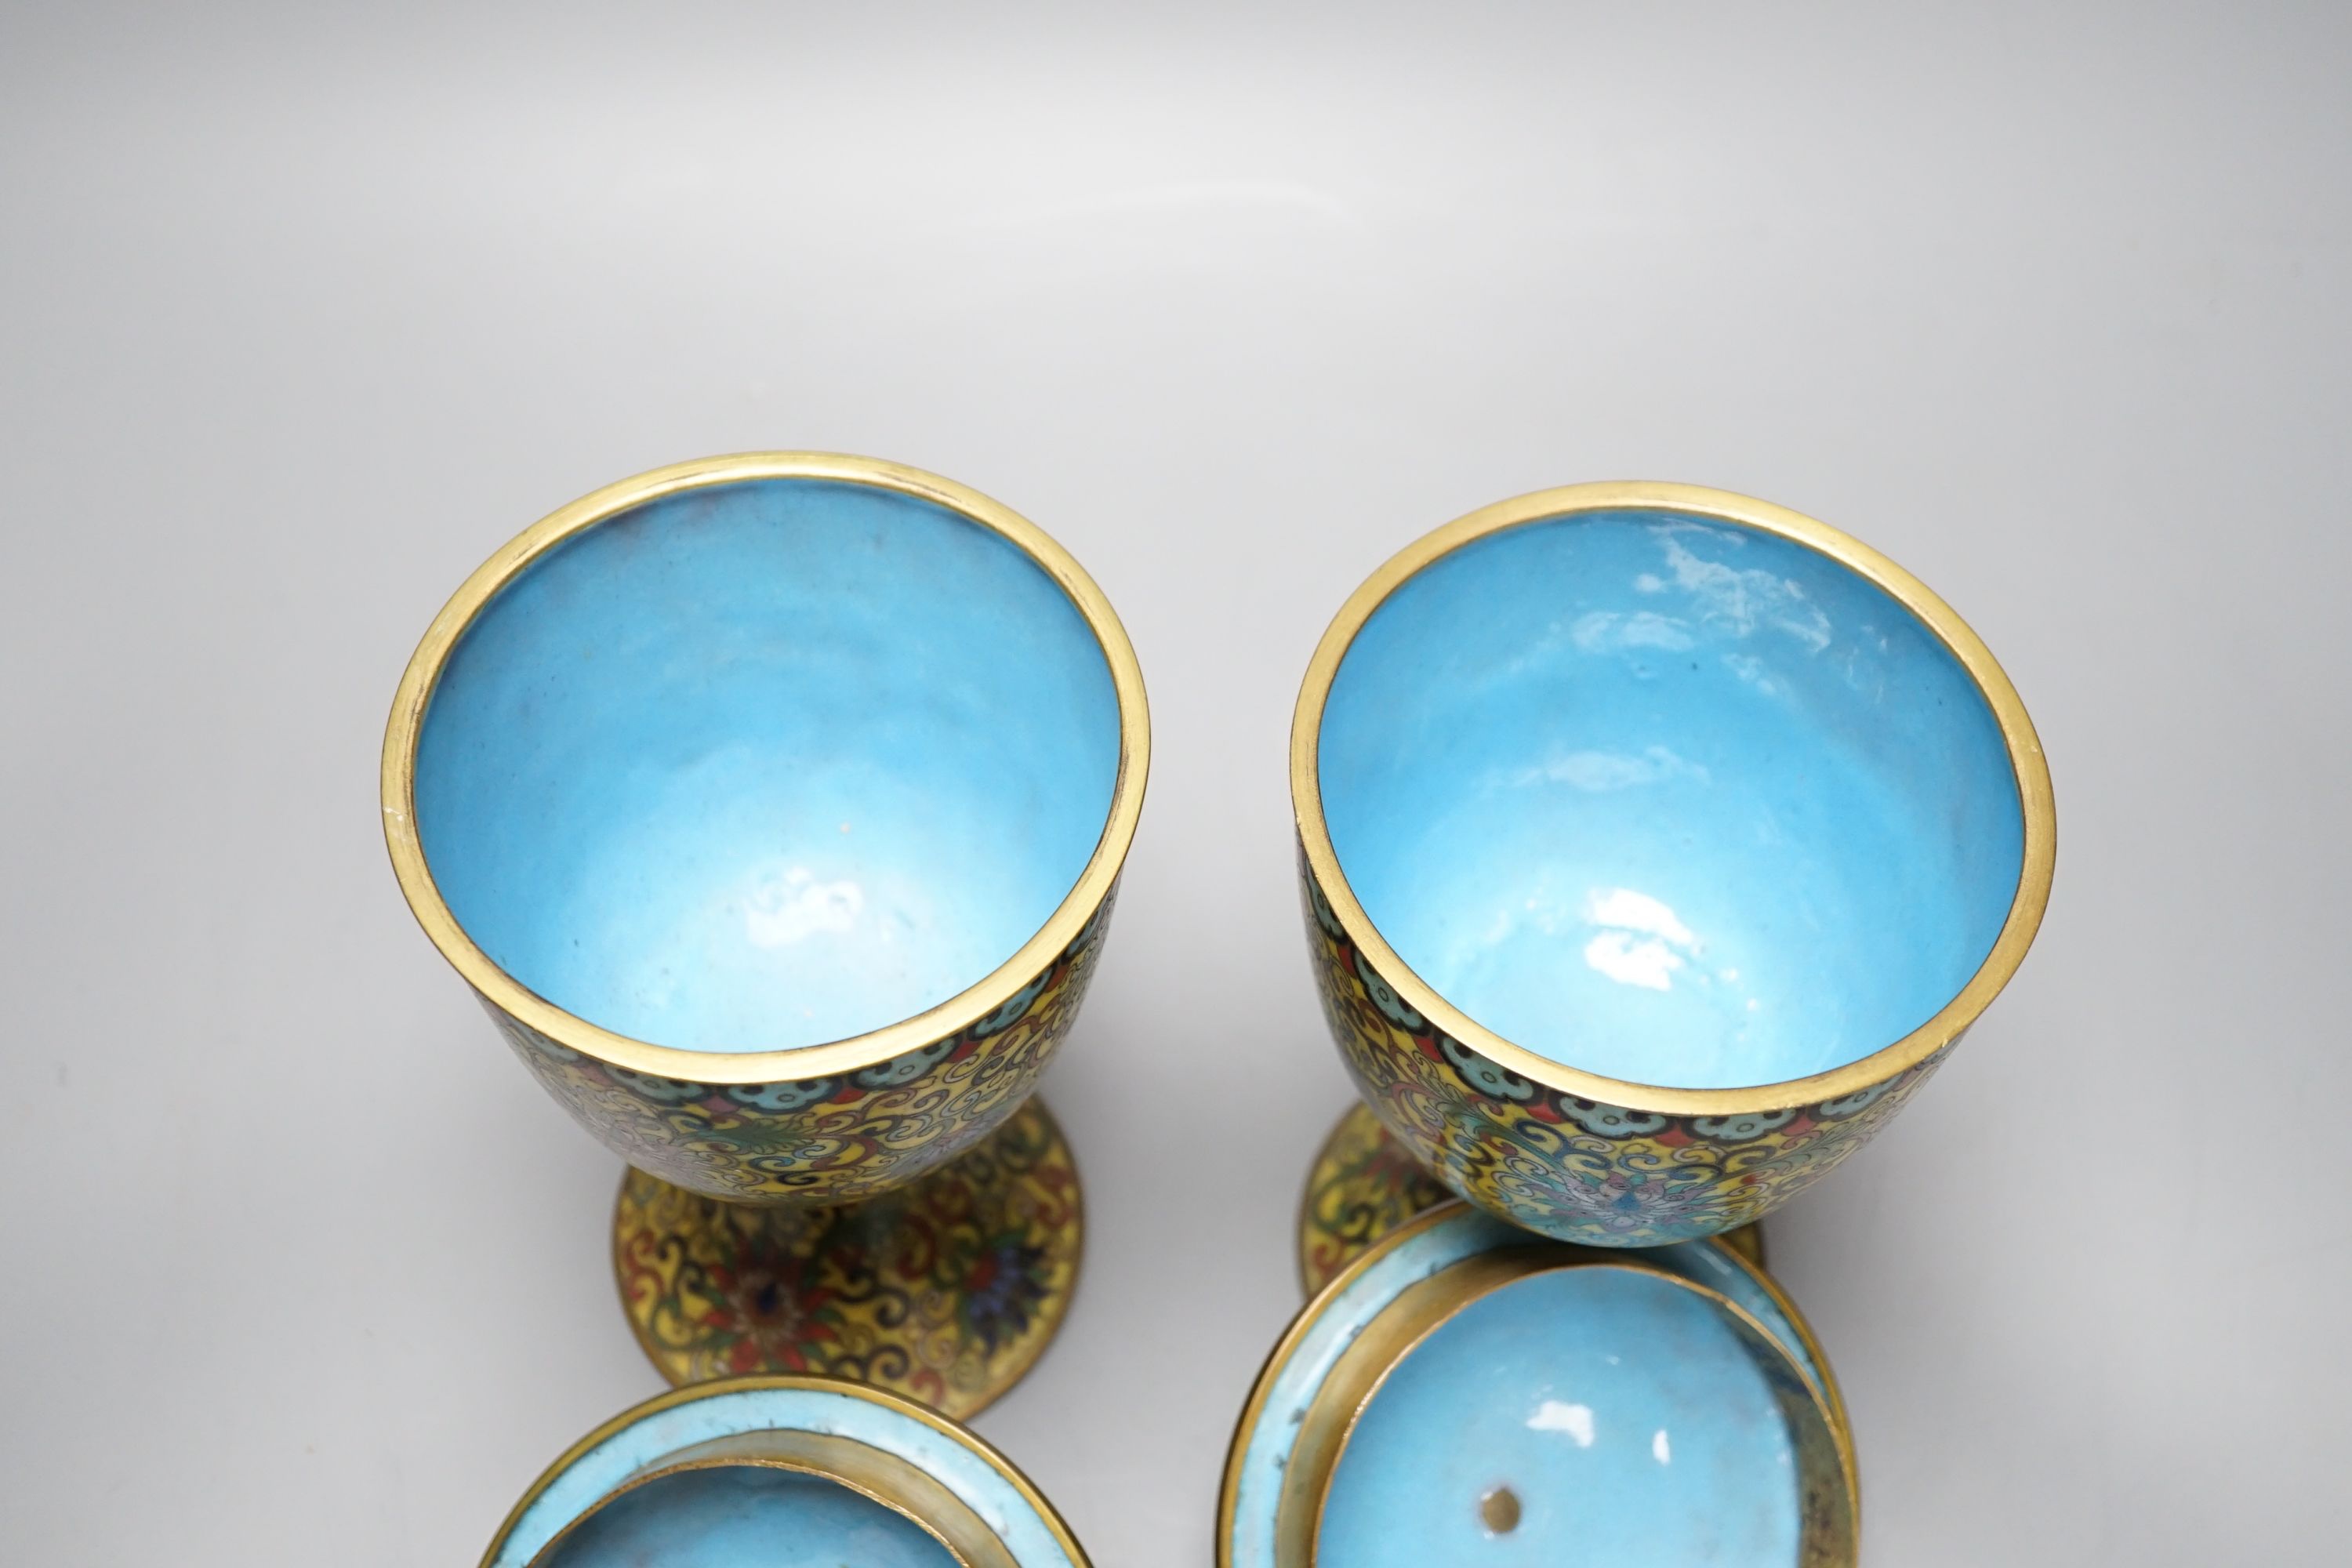 A pair of decorative cloisonné goblets and covers - 22.5cm high